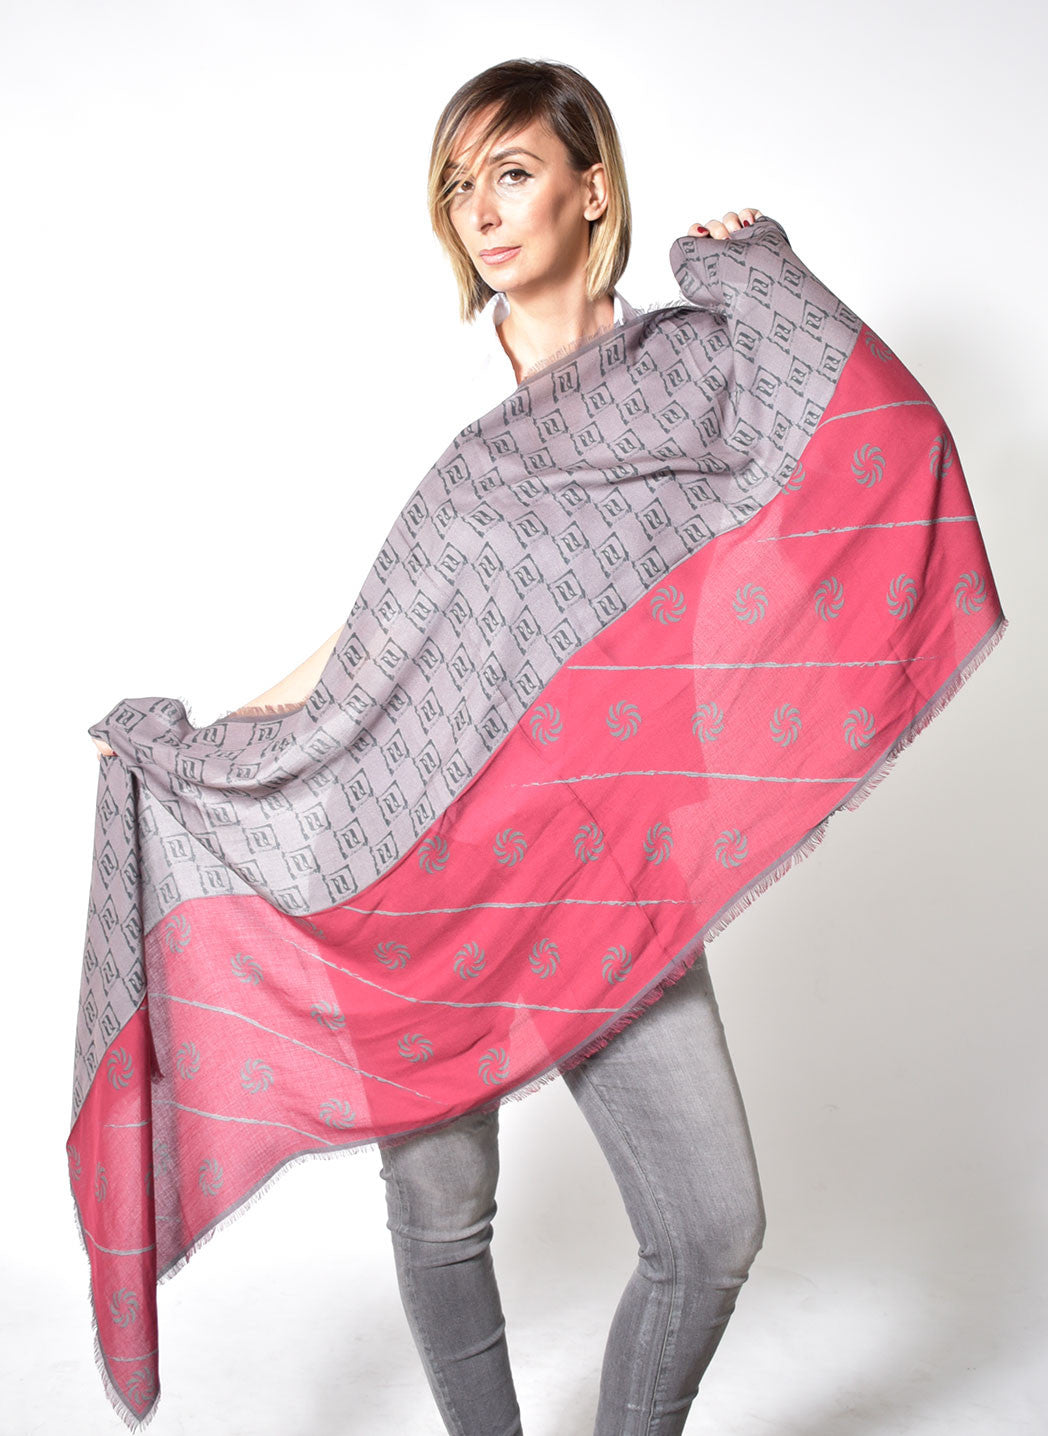 Eternity Burgundy Unisex Scarf - Anet's Collection - 4